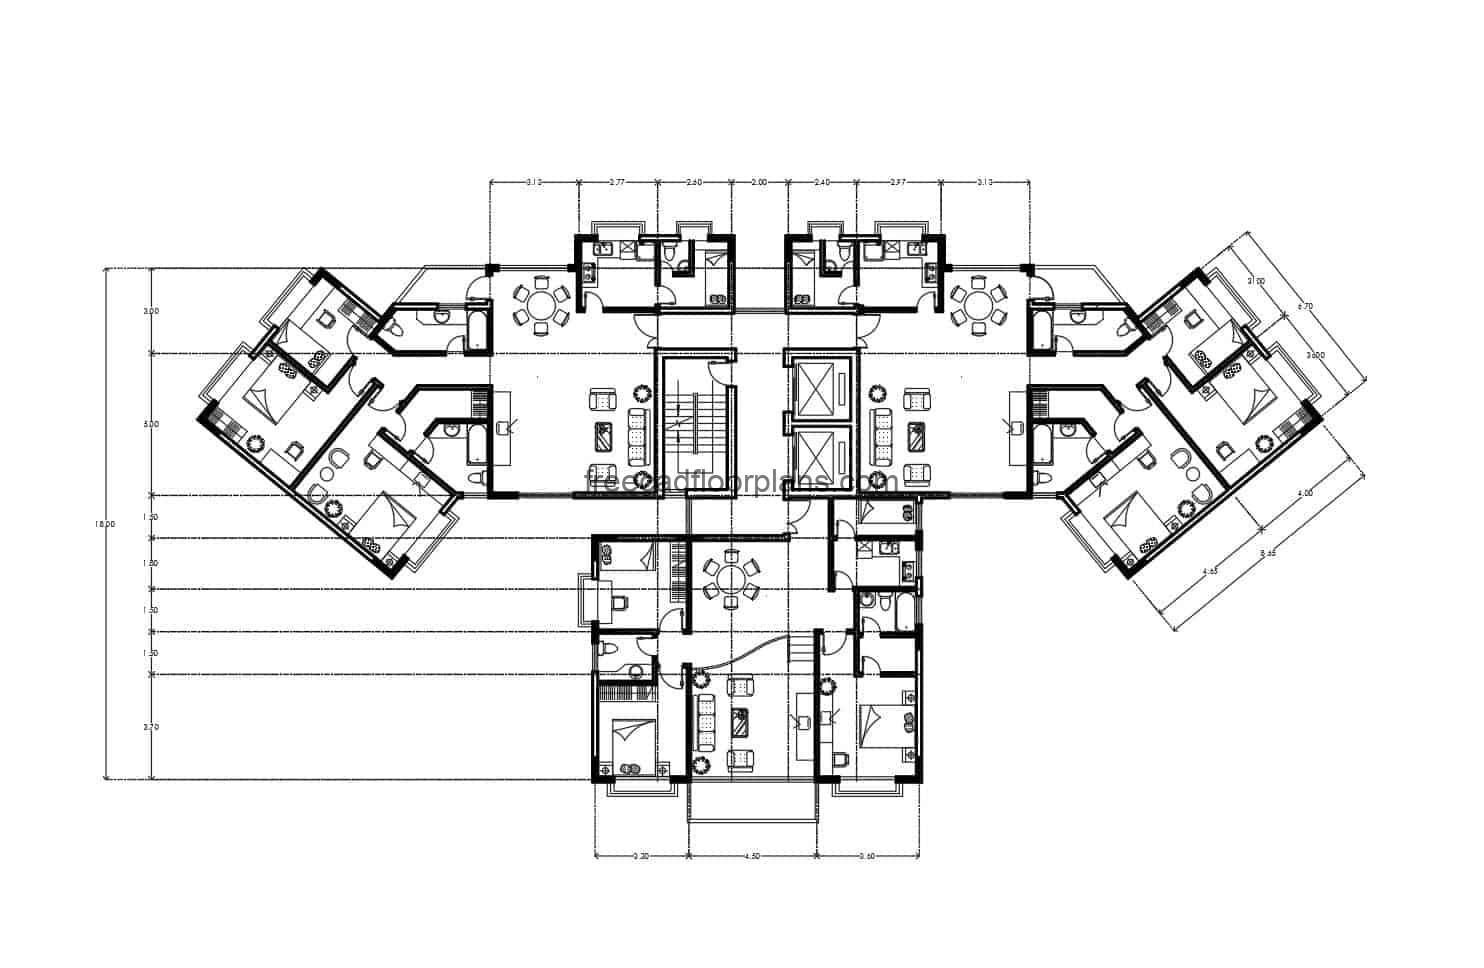 Architectural project for free download of housing complex, dimensioned and architectural plan, plans drawn in Autocad DWG format